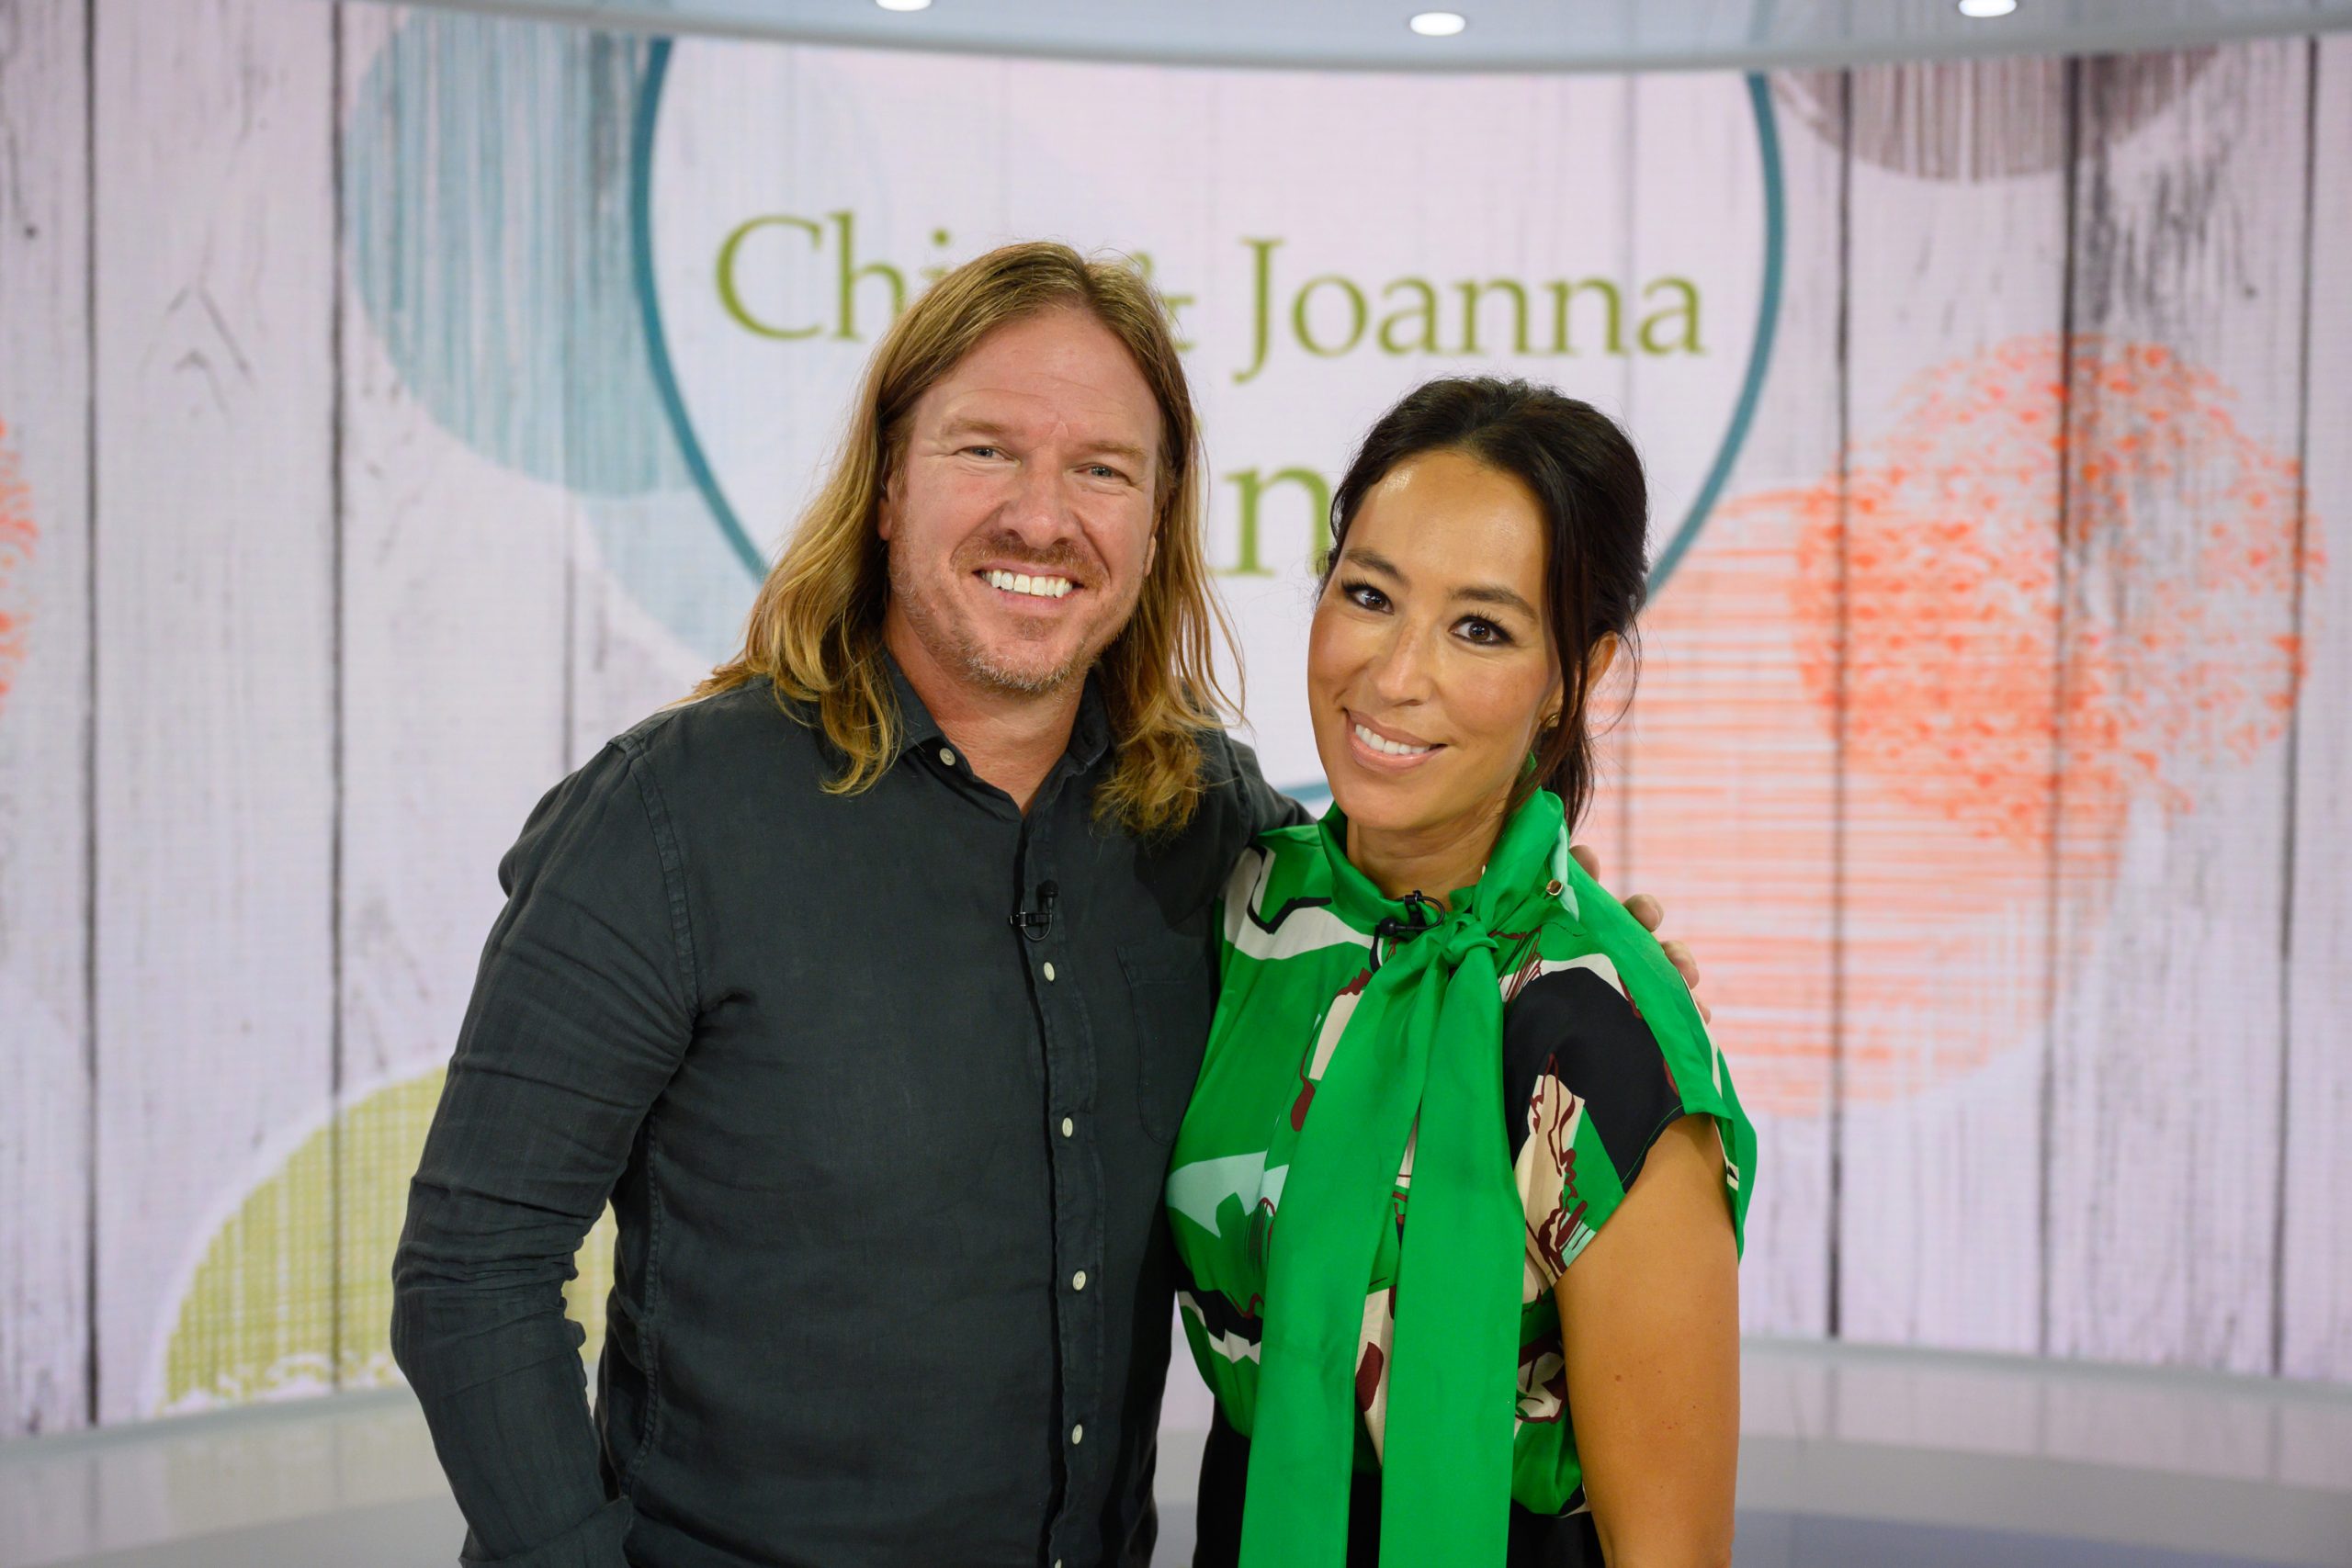 Chip and Joanna Gaines at the Today show.